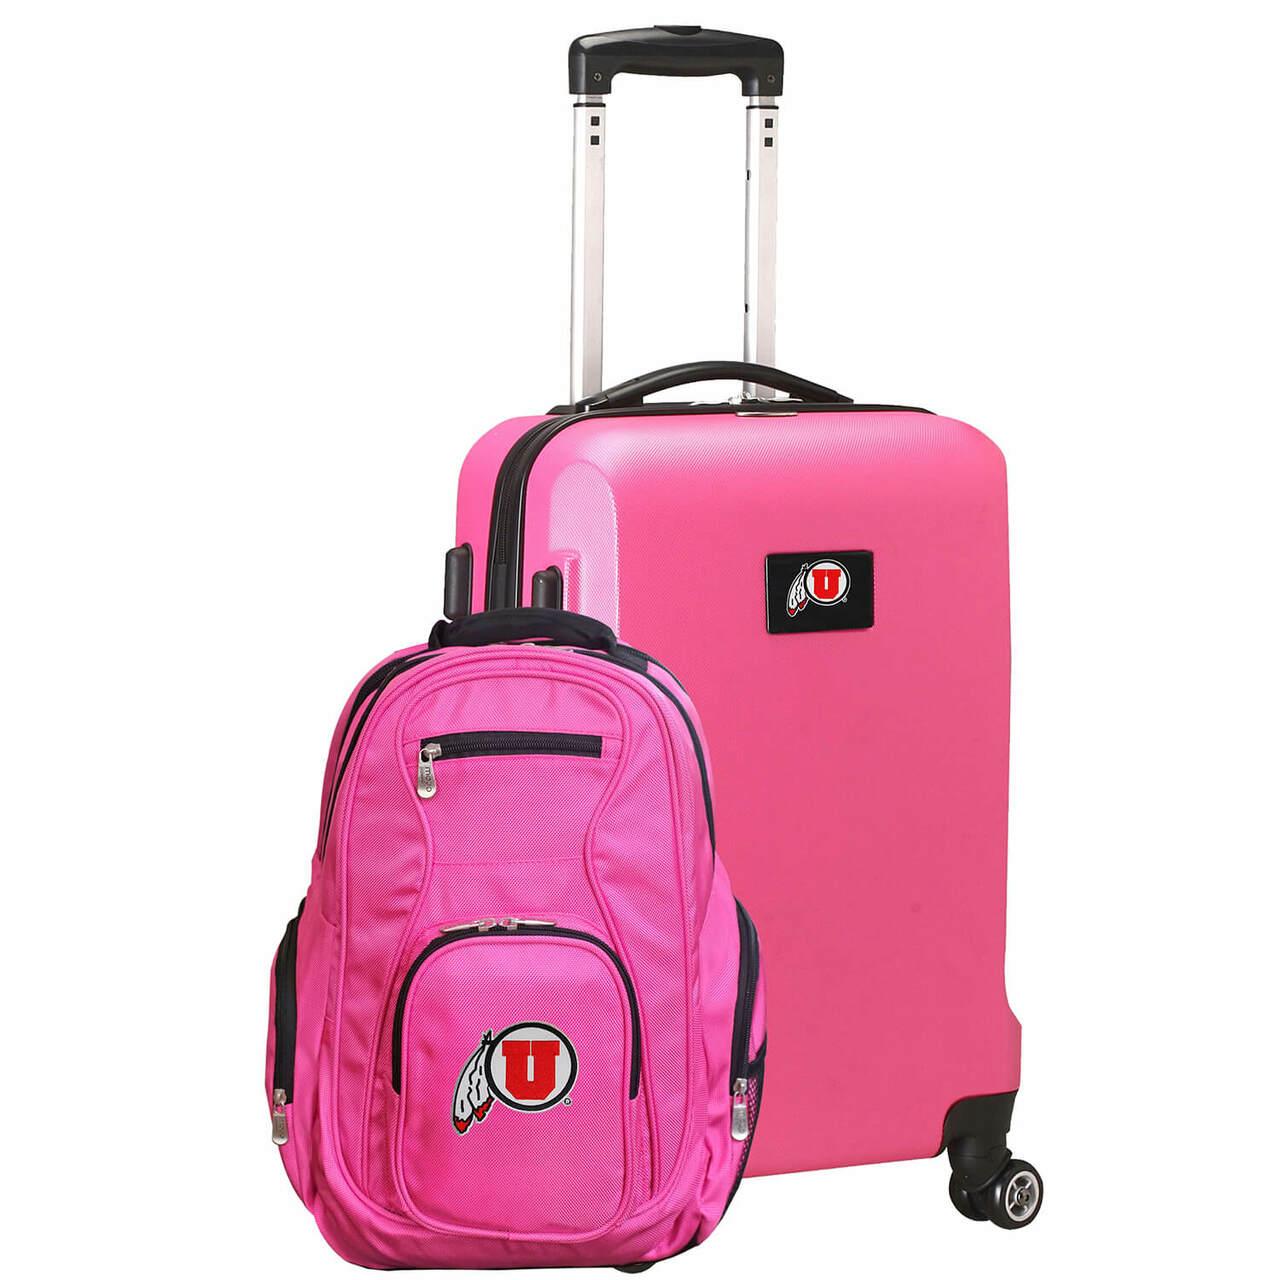 Utah Utes Deluxe 2-Piece Backpack and Carry on Set in Pink